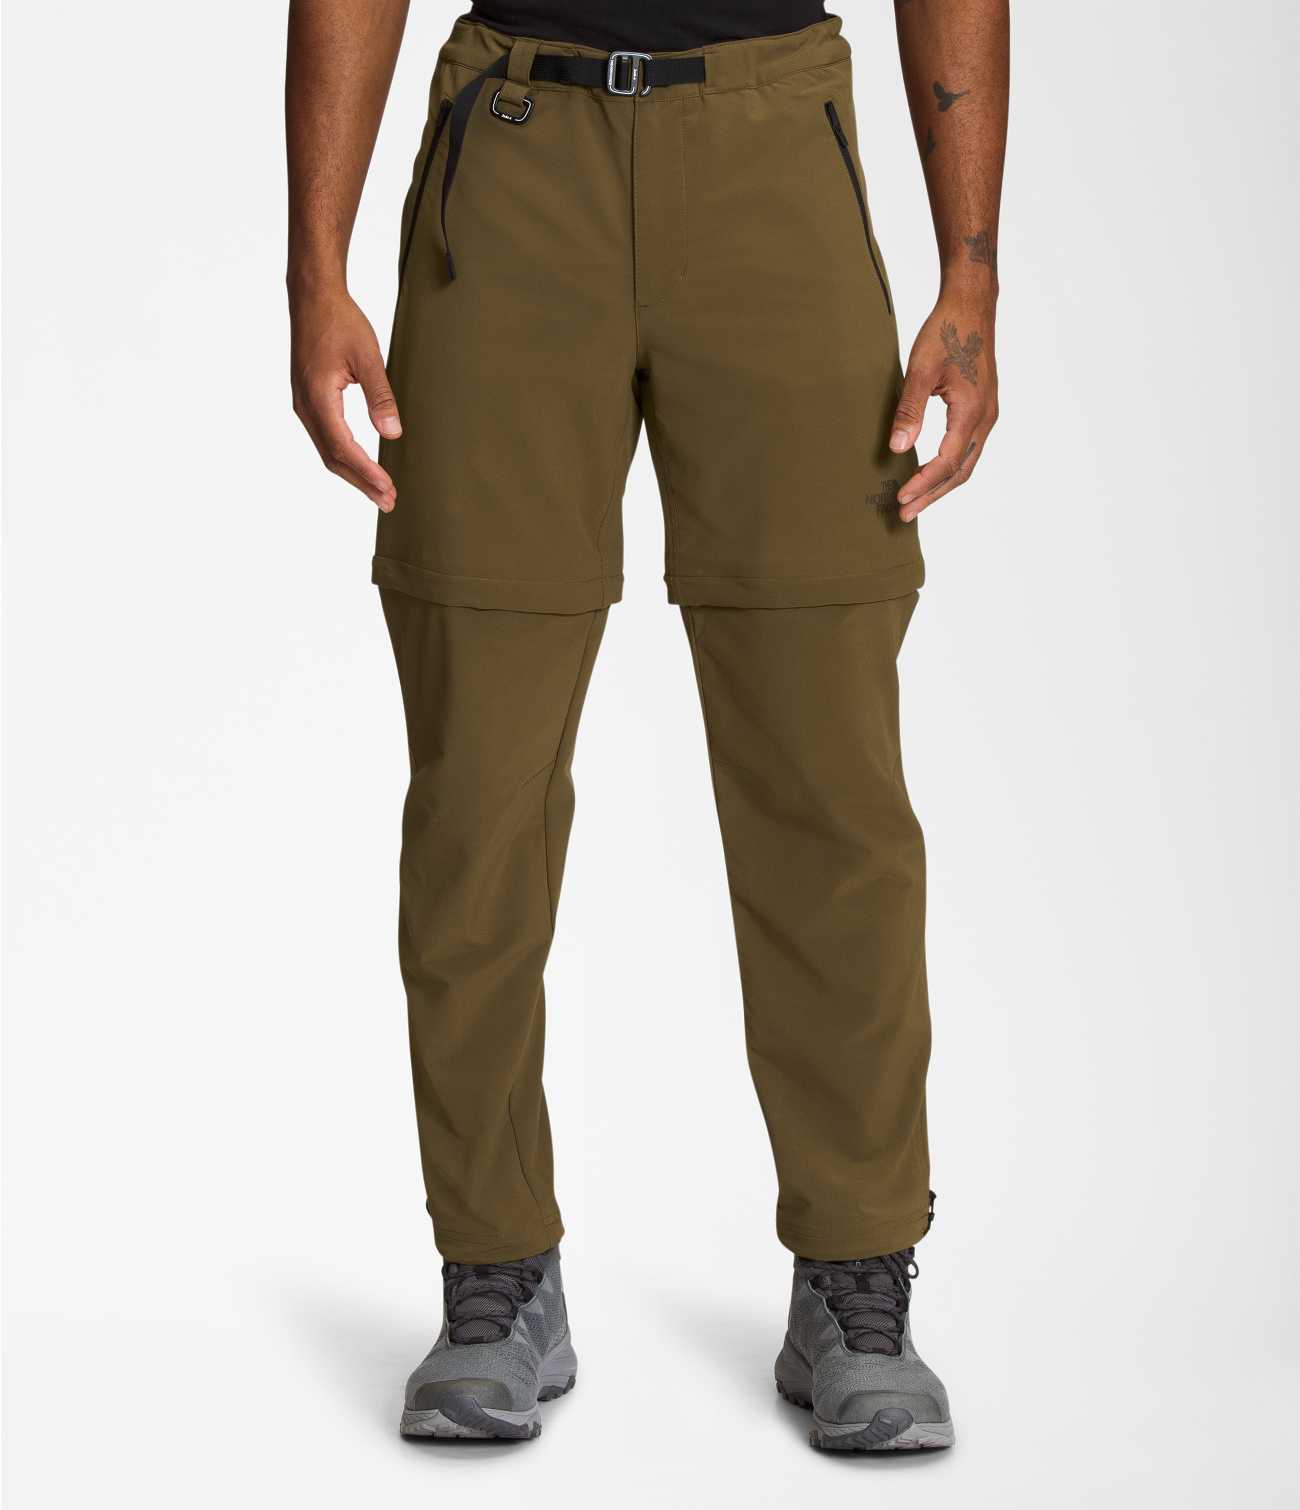  THE NORTH FACE Men's Paramount Trail Convertible